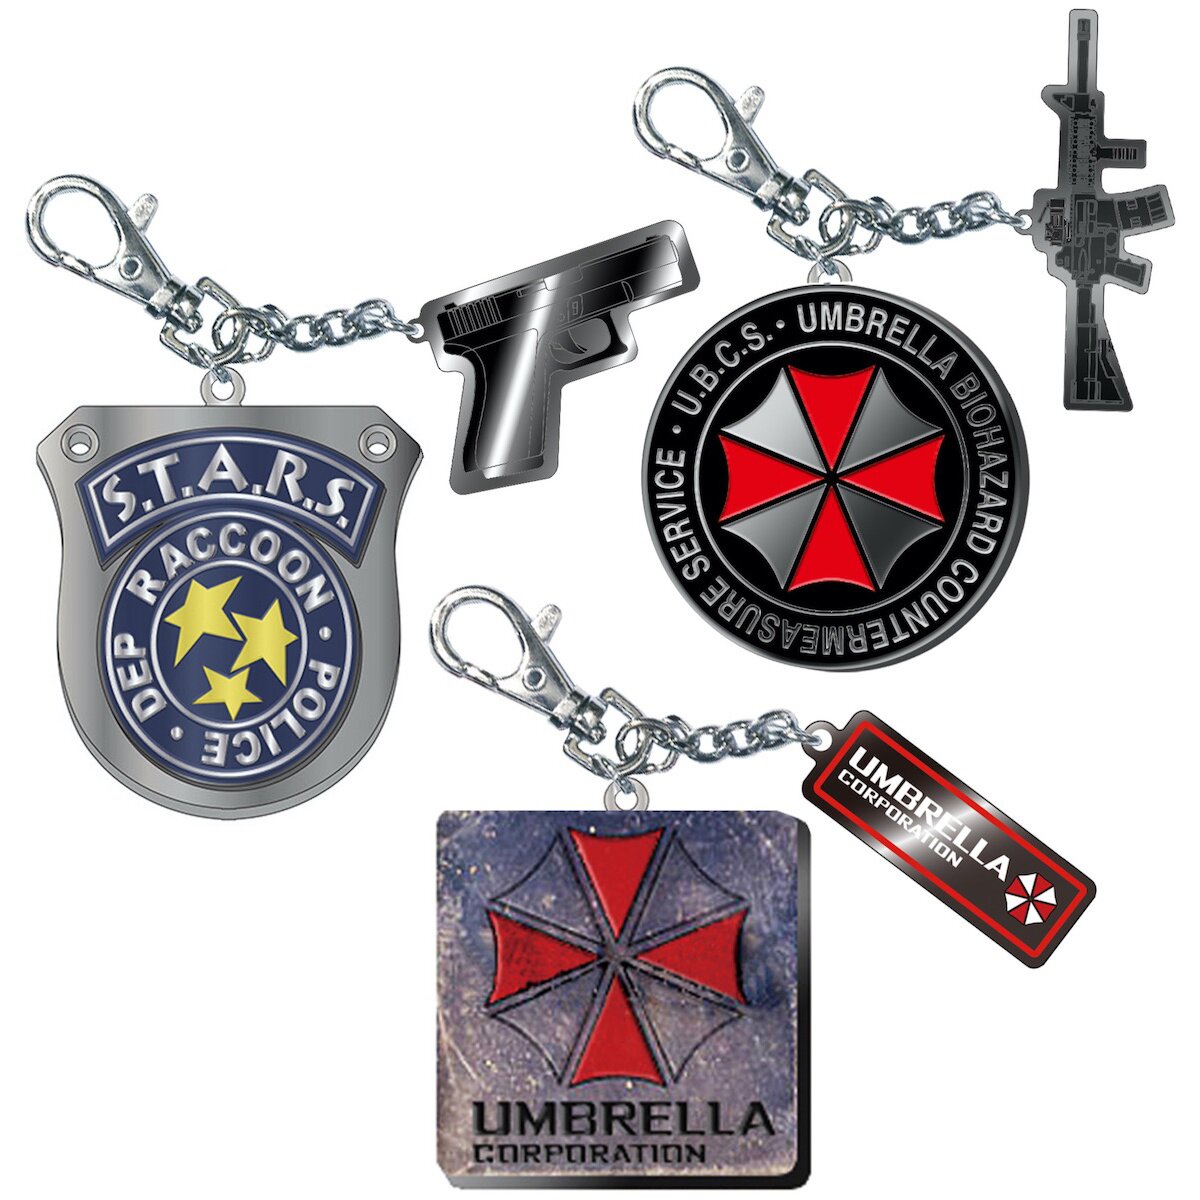 Resident Evil 3 S.T.A.R.S. Metal Keychain Collection: Capcom